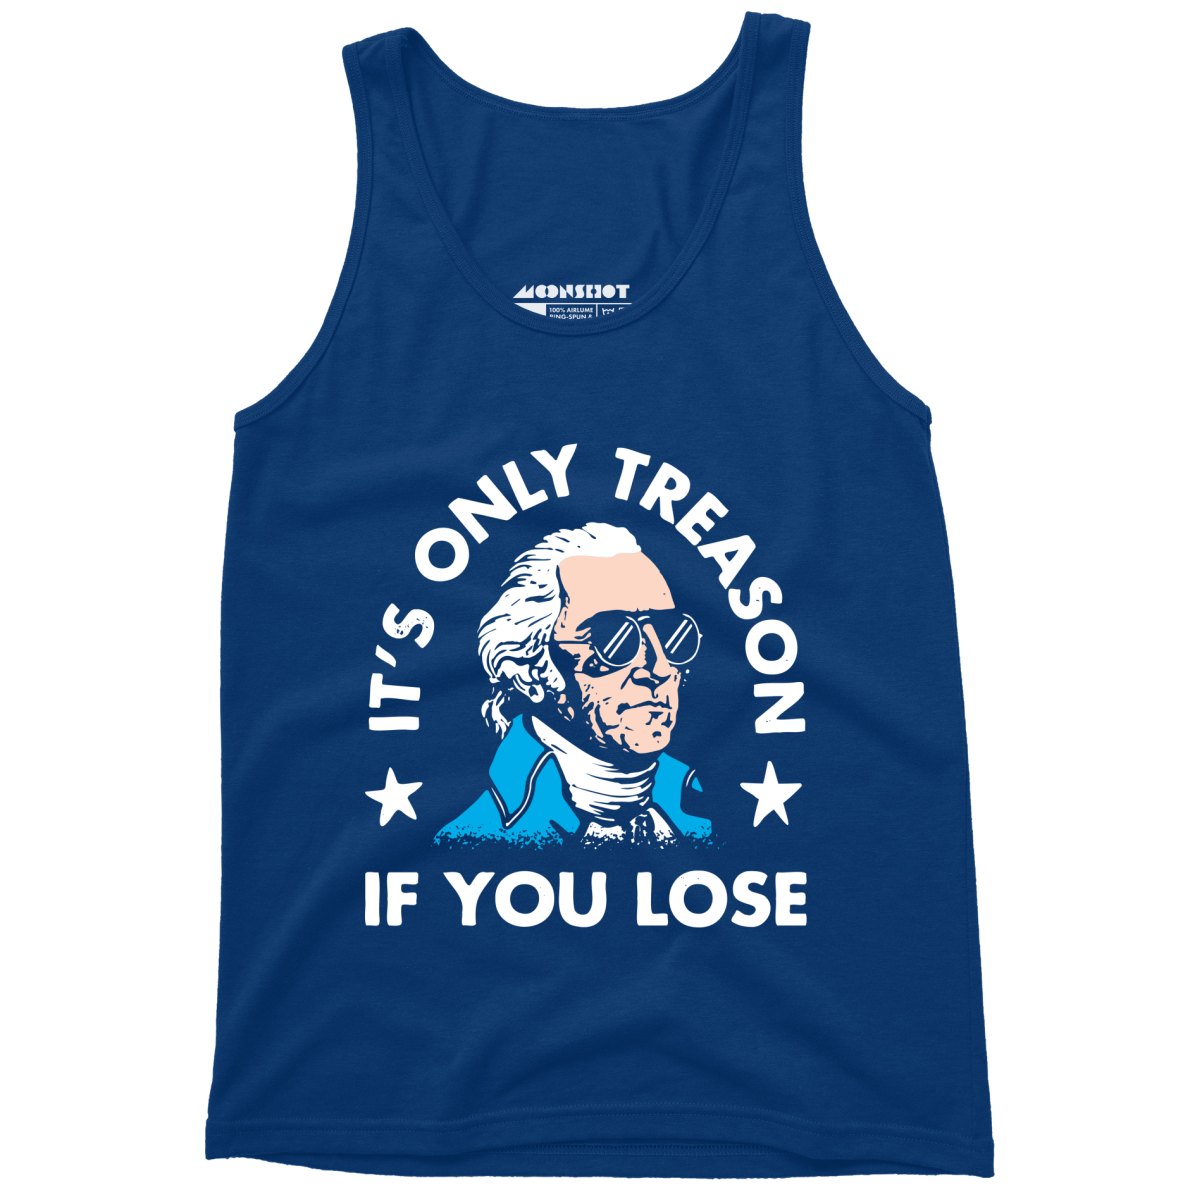 It's Only Treason If You Lose - Unisex Tank Top